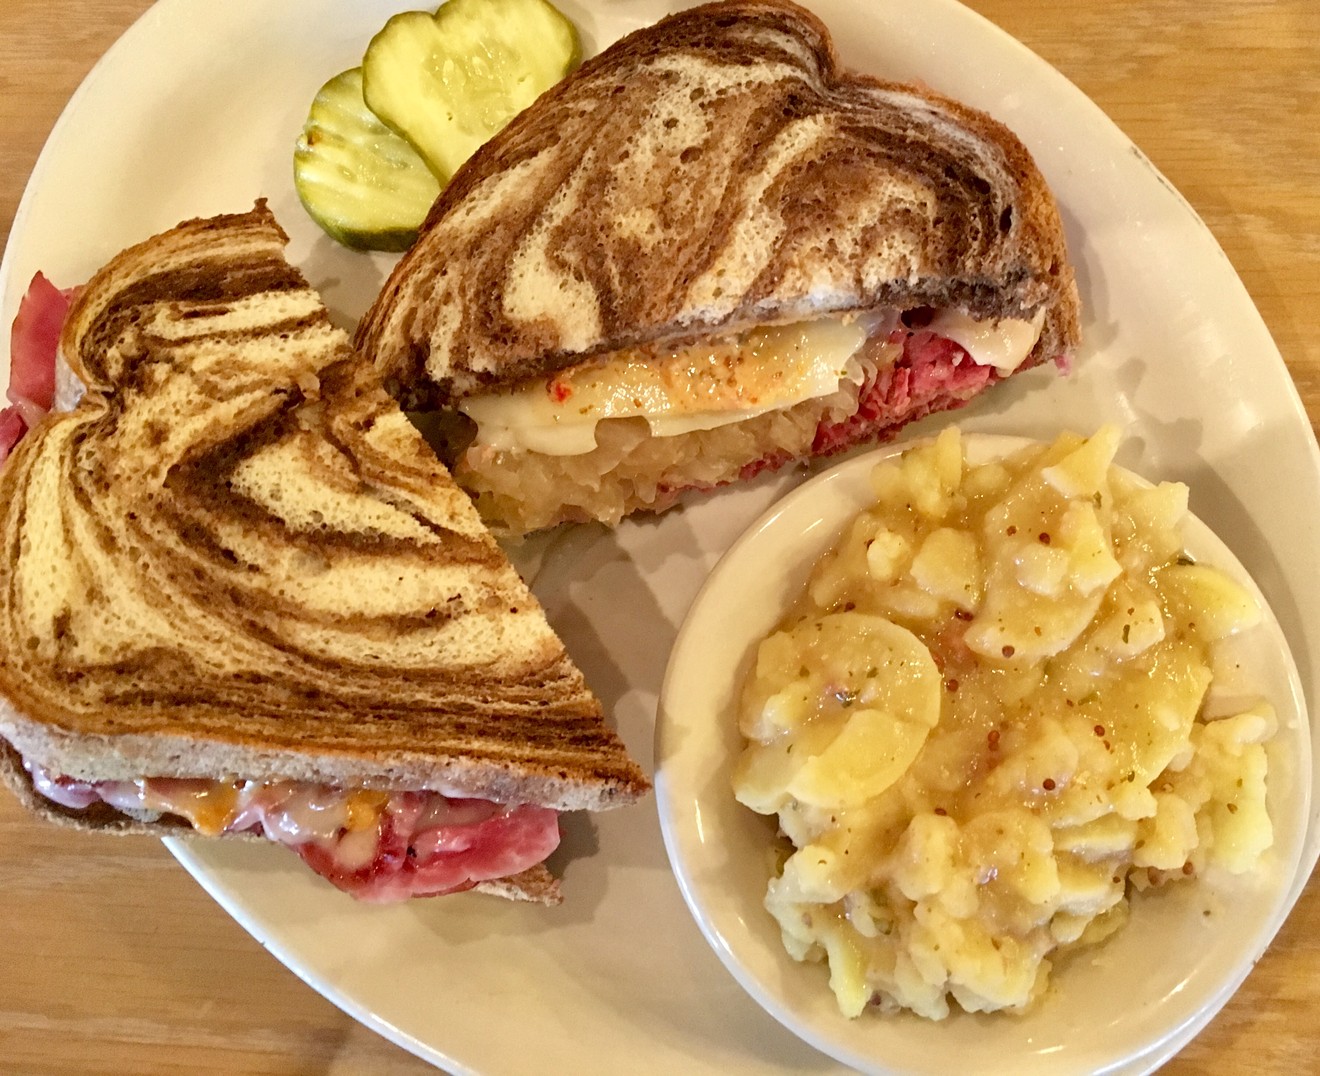 The corned beef and Swiss Reuben at Kuby's for $7.95.